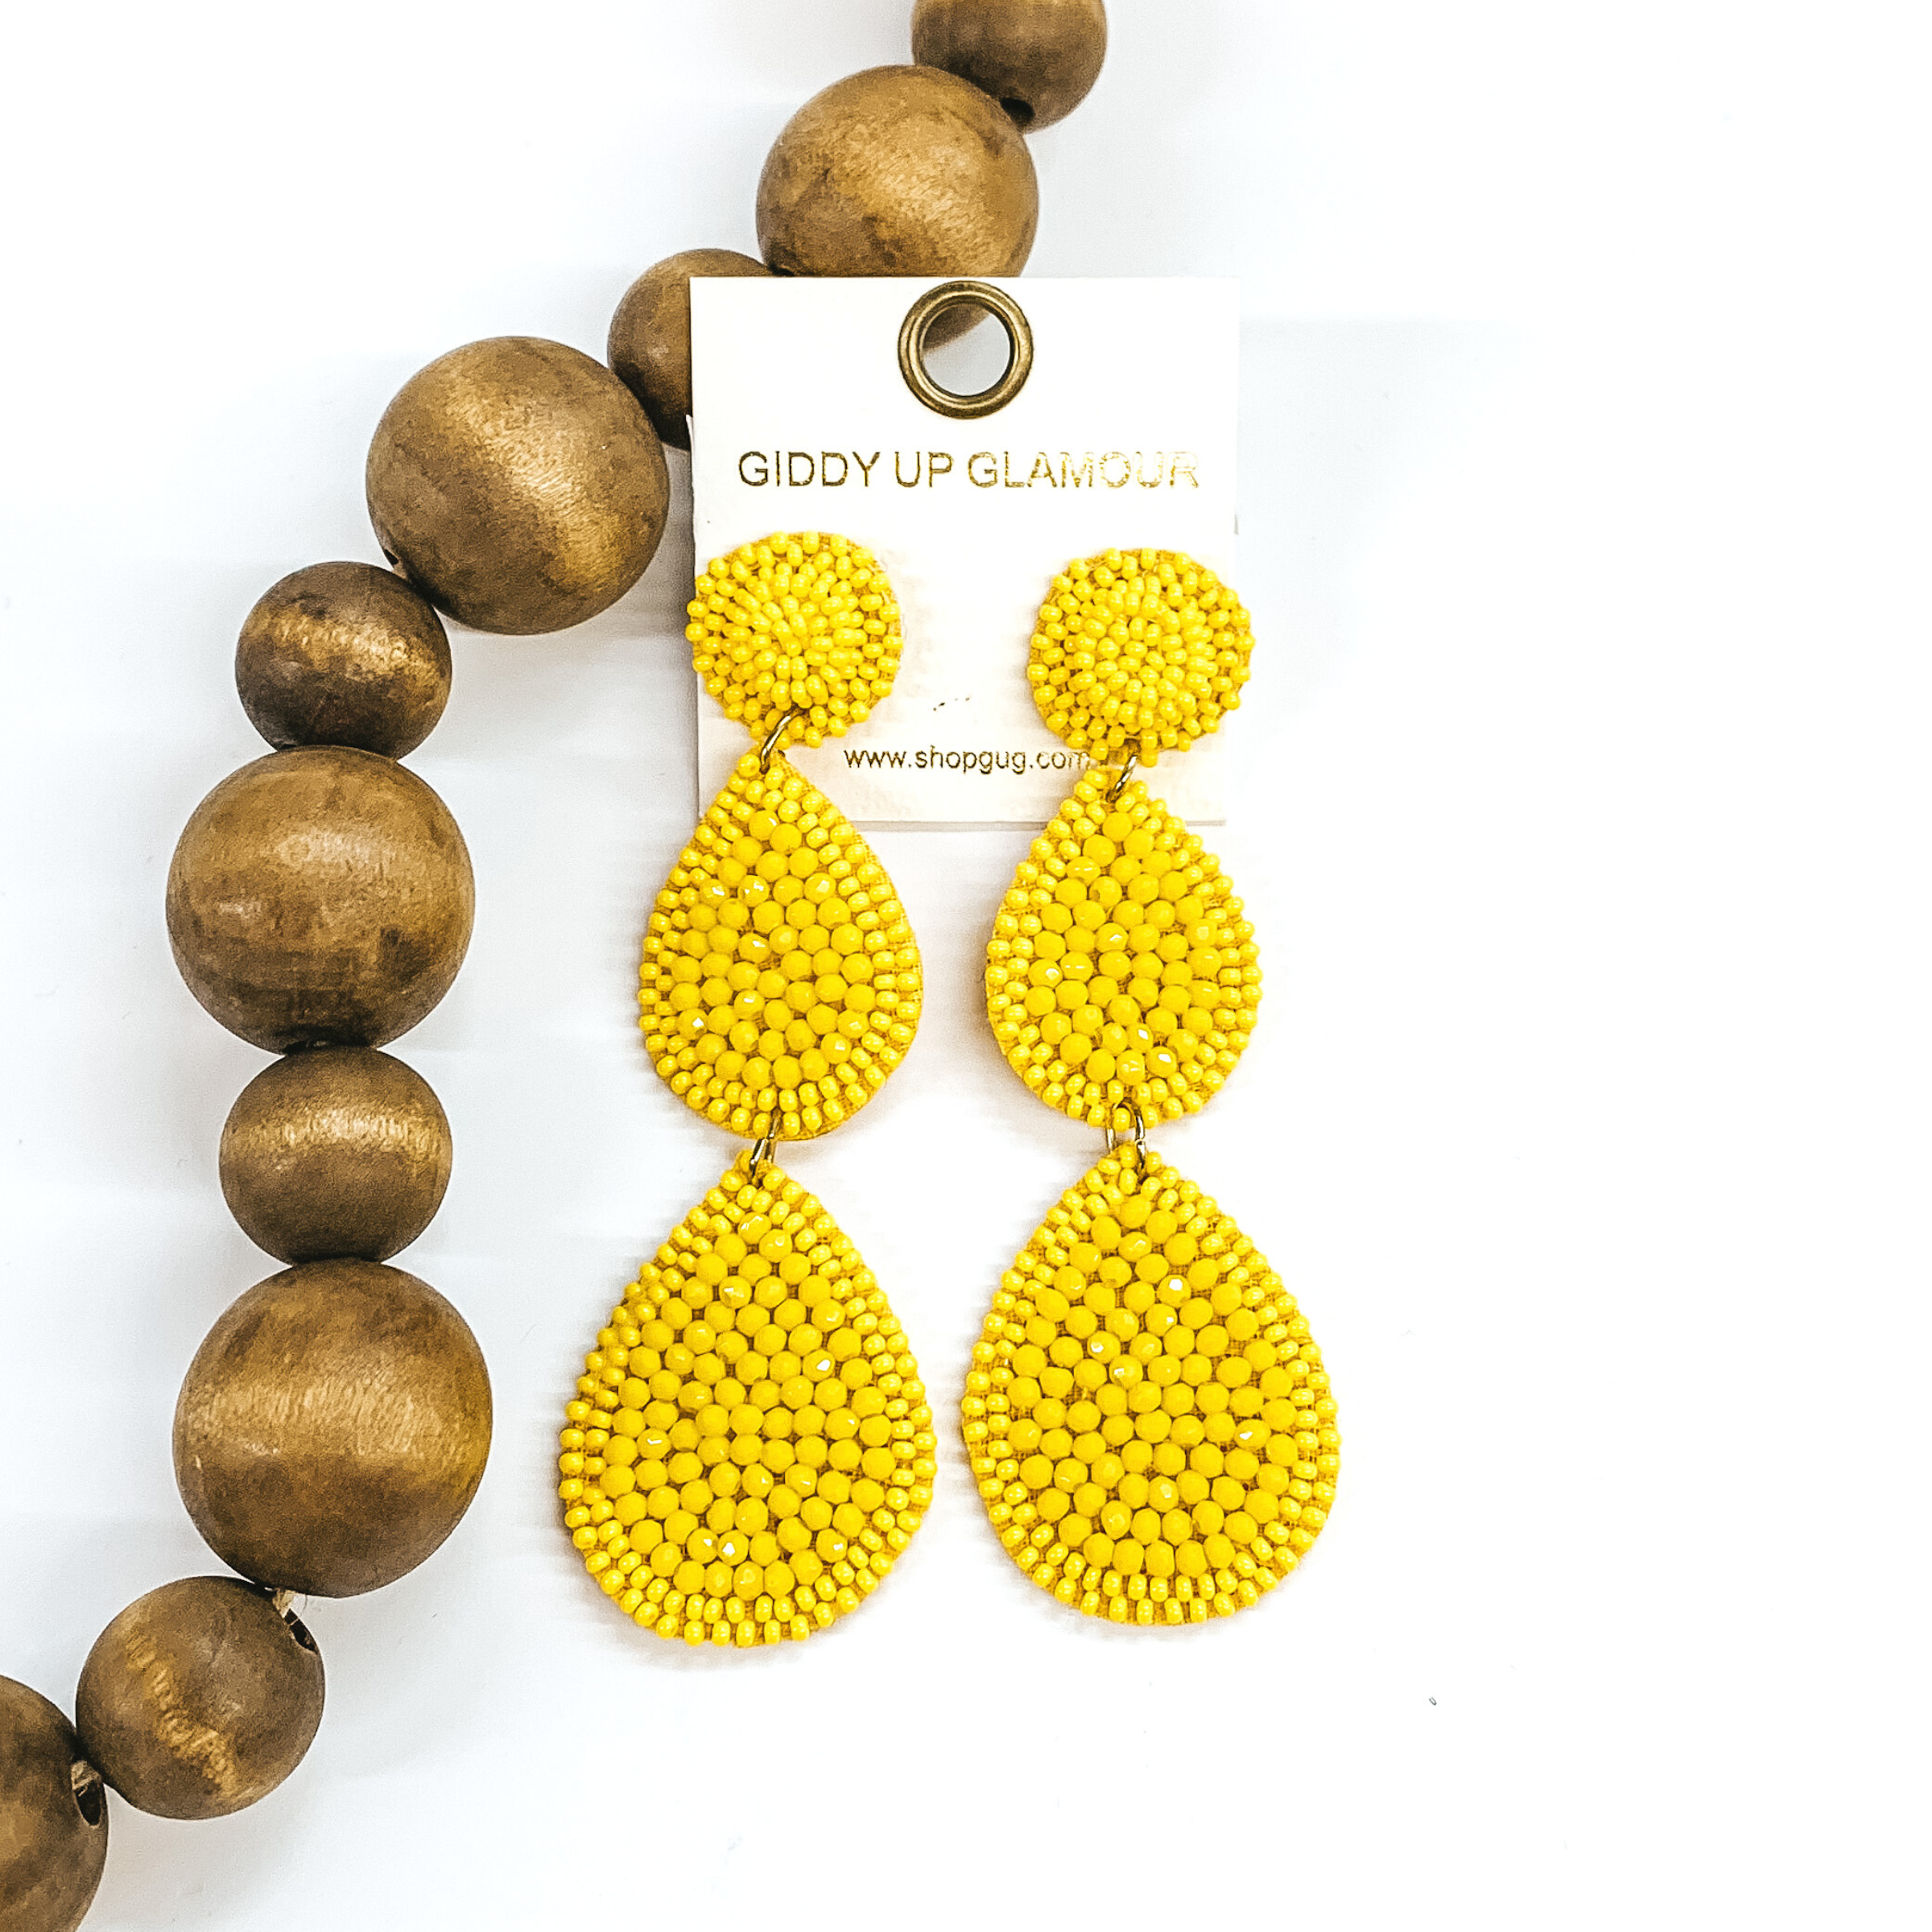 Beaded three tiered earrings in yellow. These earrings start off with a circle then has two hanging teardrops with both increasing in size as they go down. These earrings are pictured on a white background with dark brown beads on the left side of the earrings.